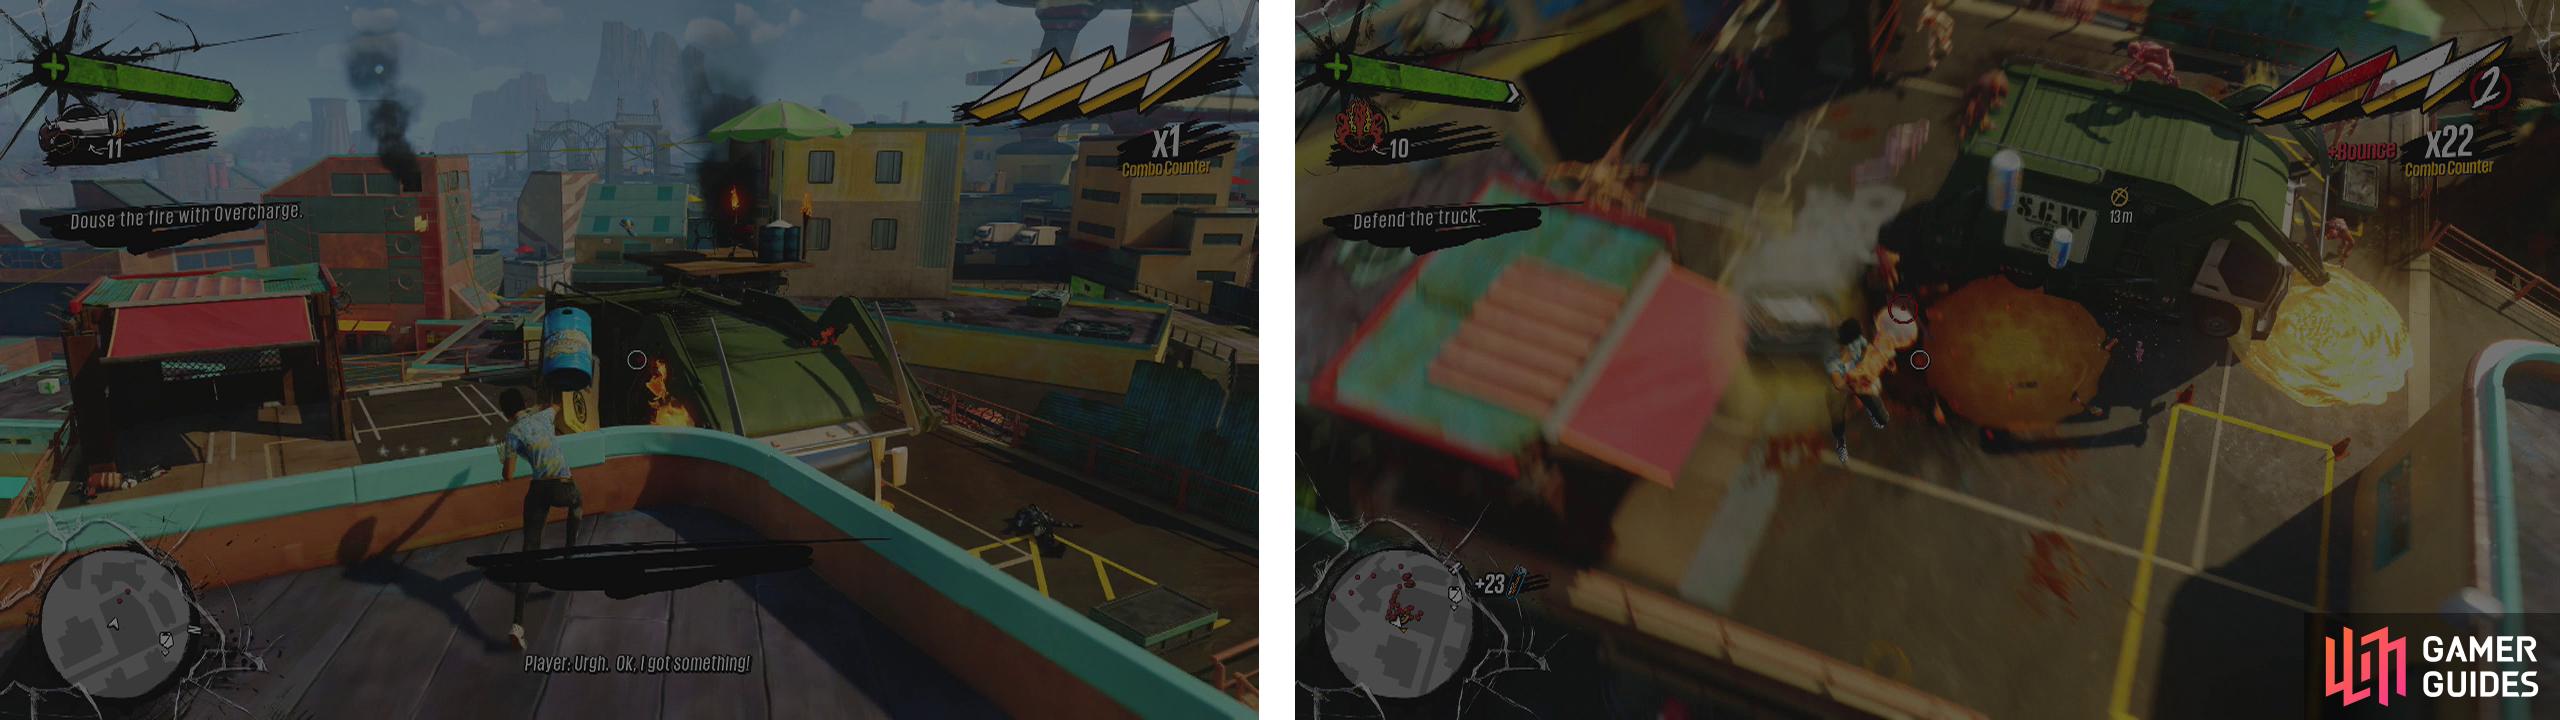 Throw the kegs of Overcharge to put out the fire (left). Then defend the truck against OD (right).